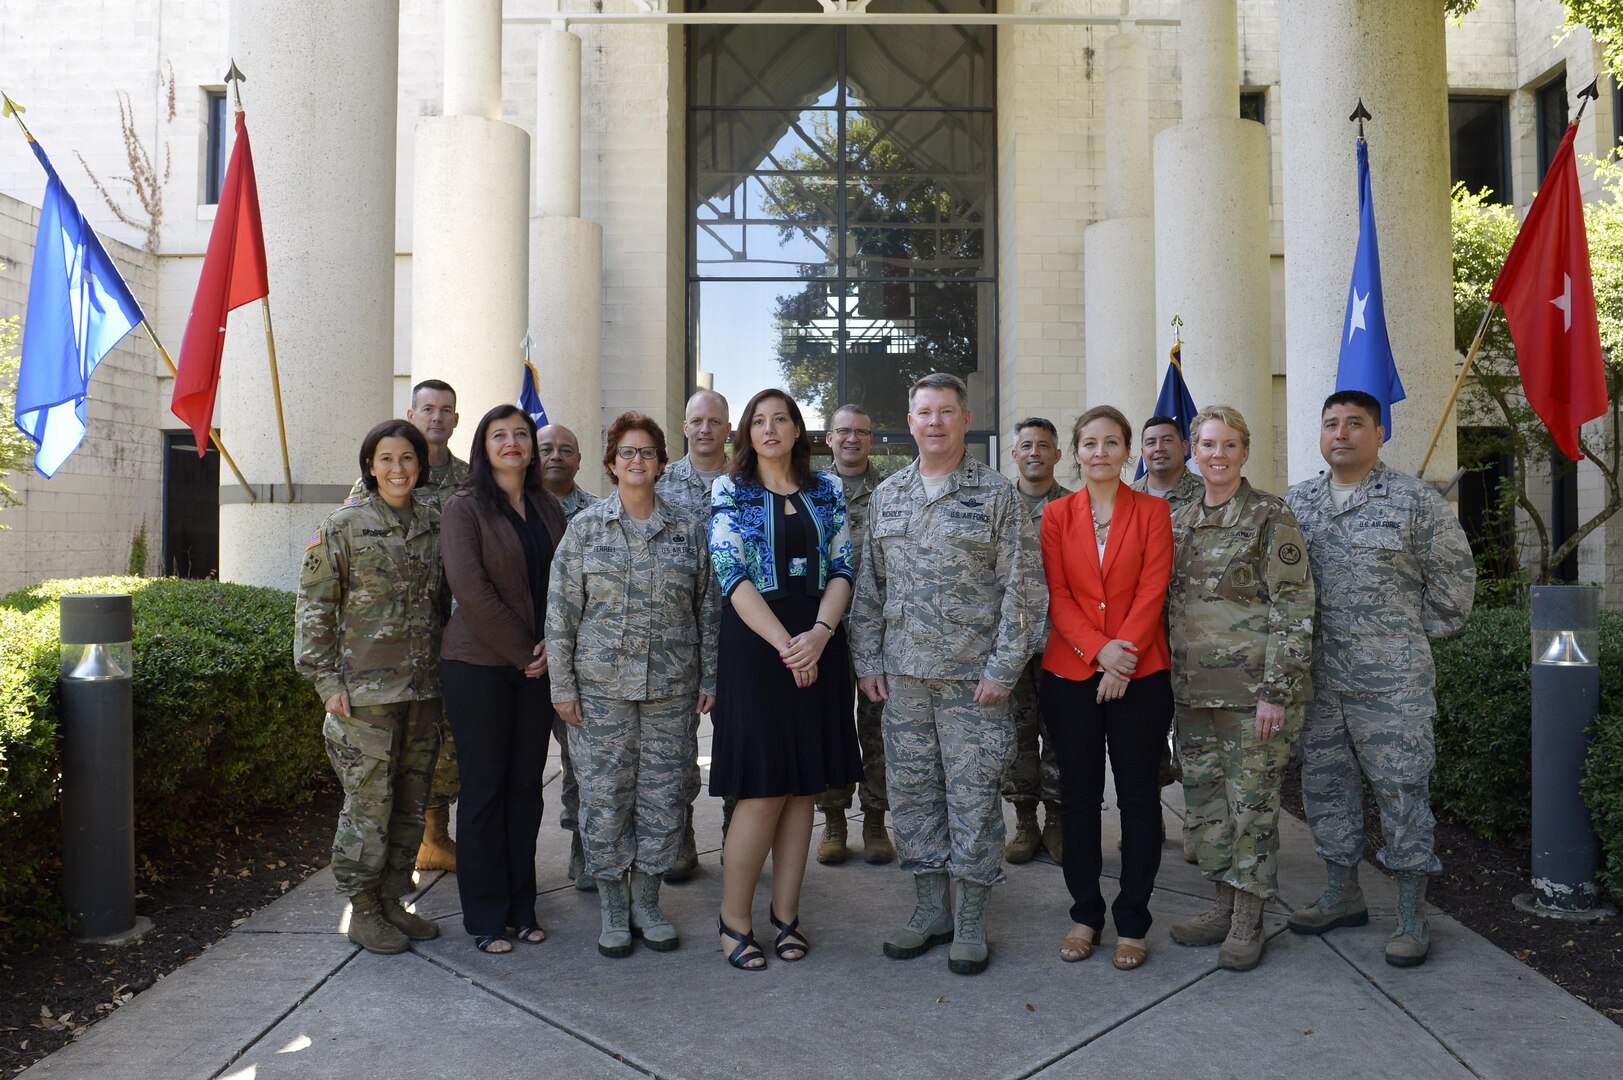 Key leaders from the Texas Army National Guard, Air National Guard, and State Guard met with members of the Chilean Undersecretary at Camp Mabry in Austin, Texas, August 8, 2016. Through the States Partnership Program, Texas has been partnered with Chile since 2009. The program is designed to link a State’s National Guard with a partner nation’s military forces government agencies in a cooperative, mutually beneficial relationship. 